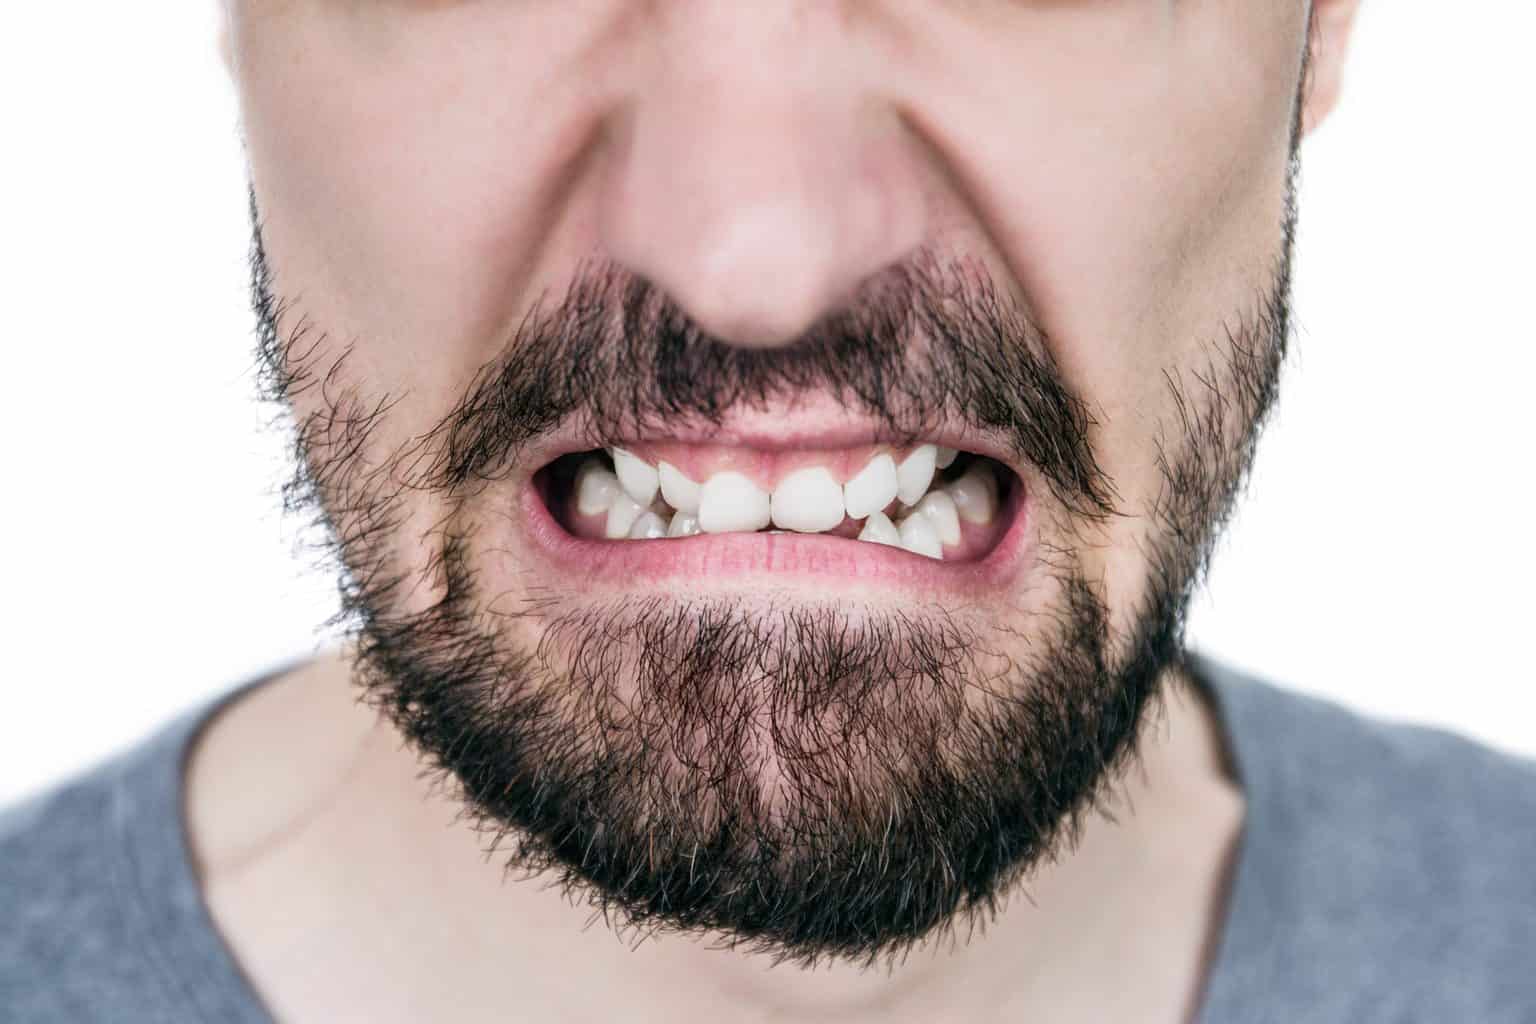 patient-with-crooked-teeth-due-to-teeth-grinding